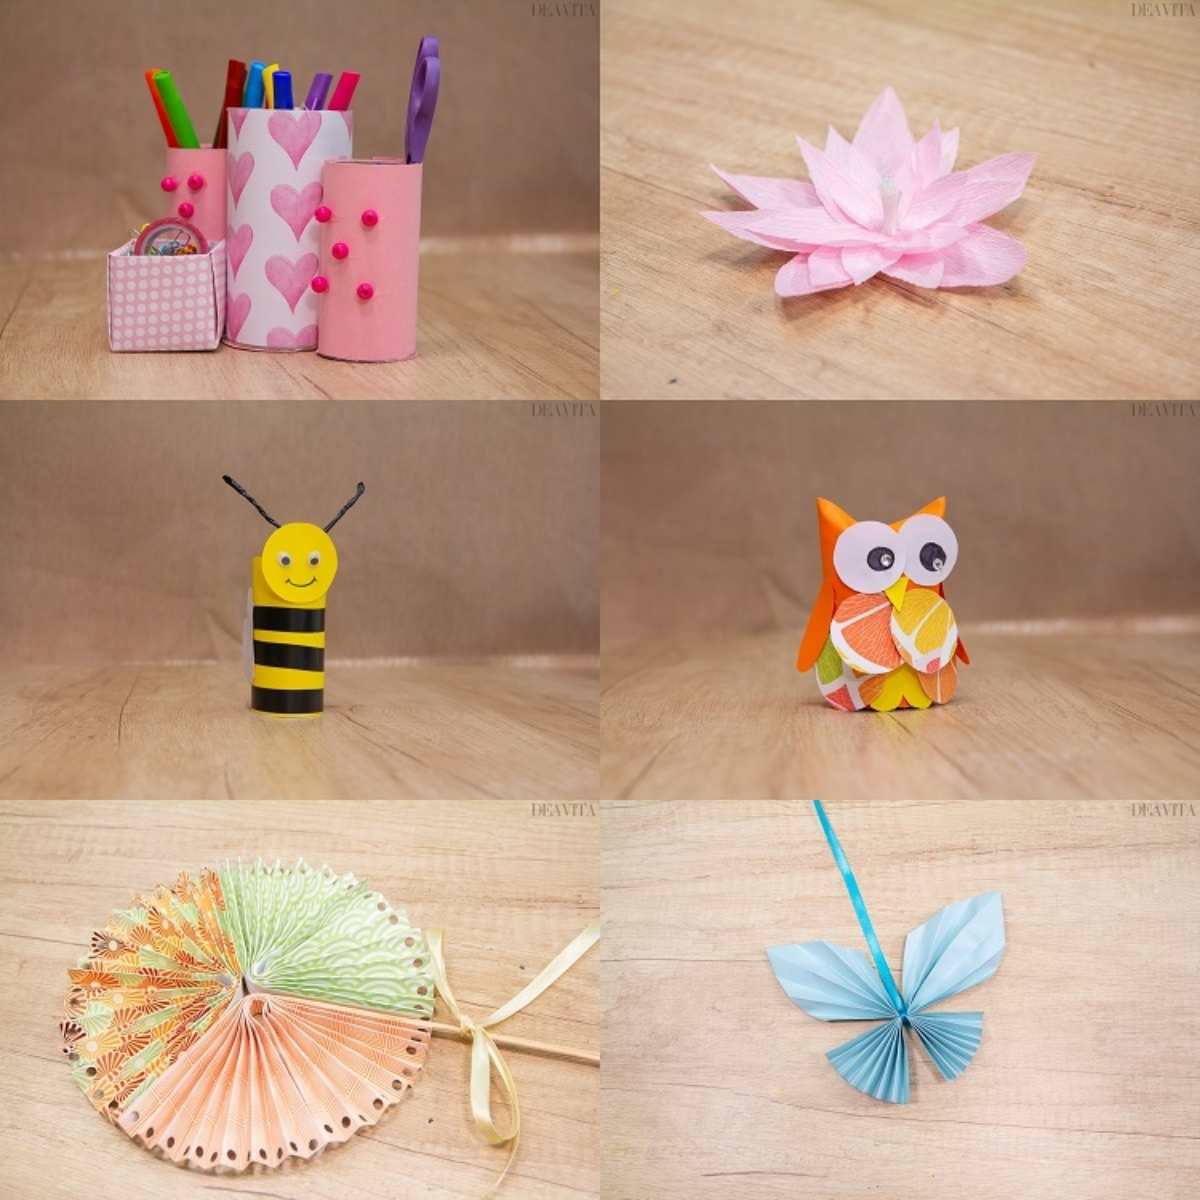 10 Simple And Original Paper Craft Ideas With Instructions